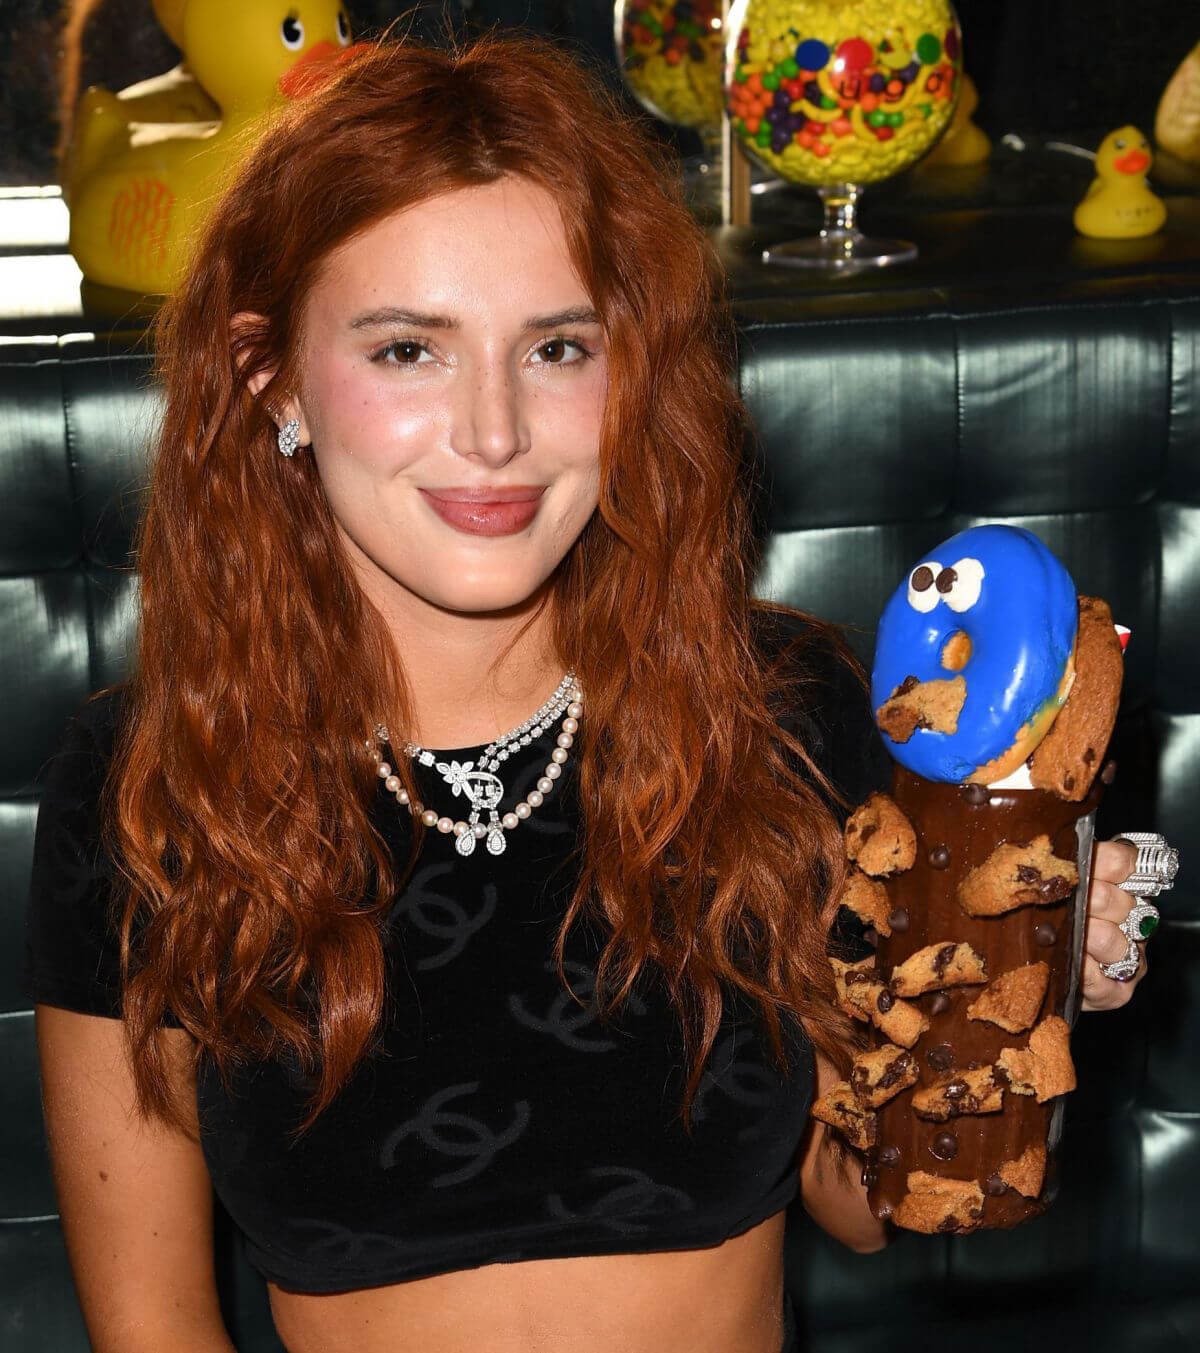 Bella Thorne Flashes Her Toned Midriff in Crop Top as She Hosts DJ Set and Listening Party at Sugar Factory in Miami 03/11/2021 6